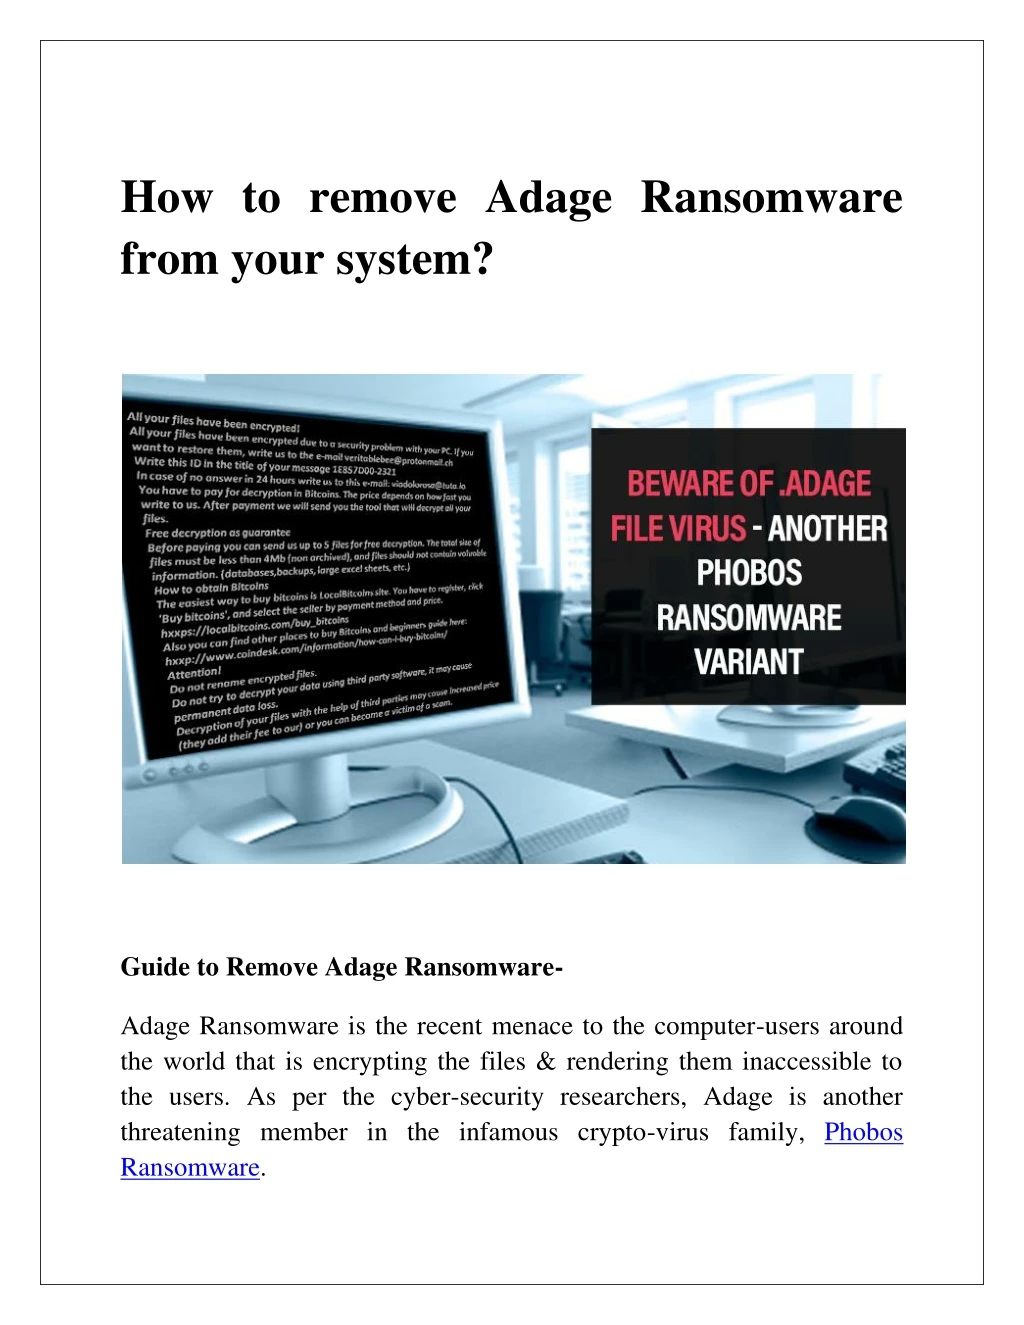 how to remove adage ransomware from your system